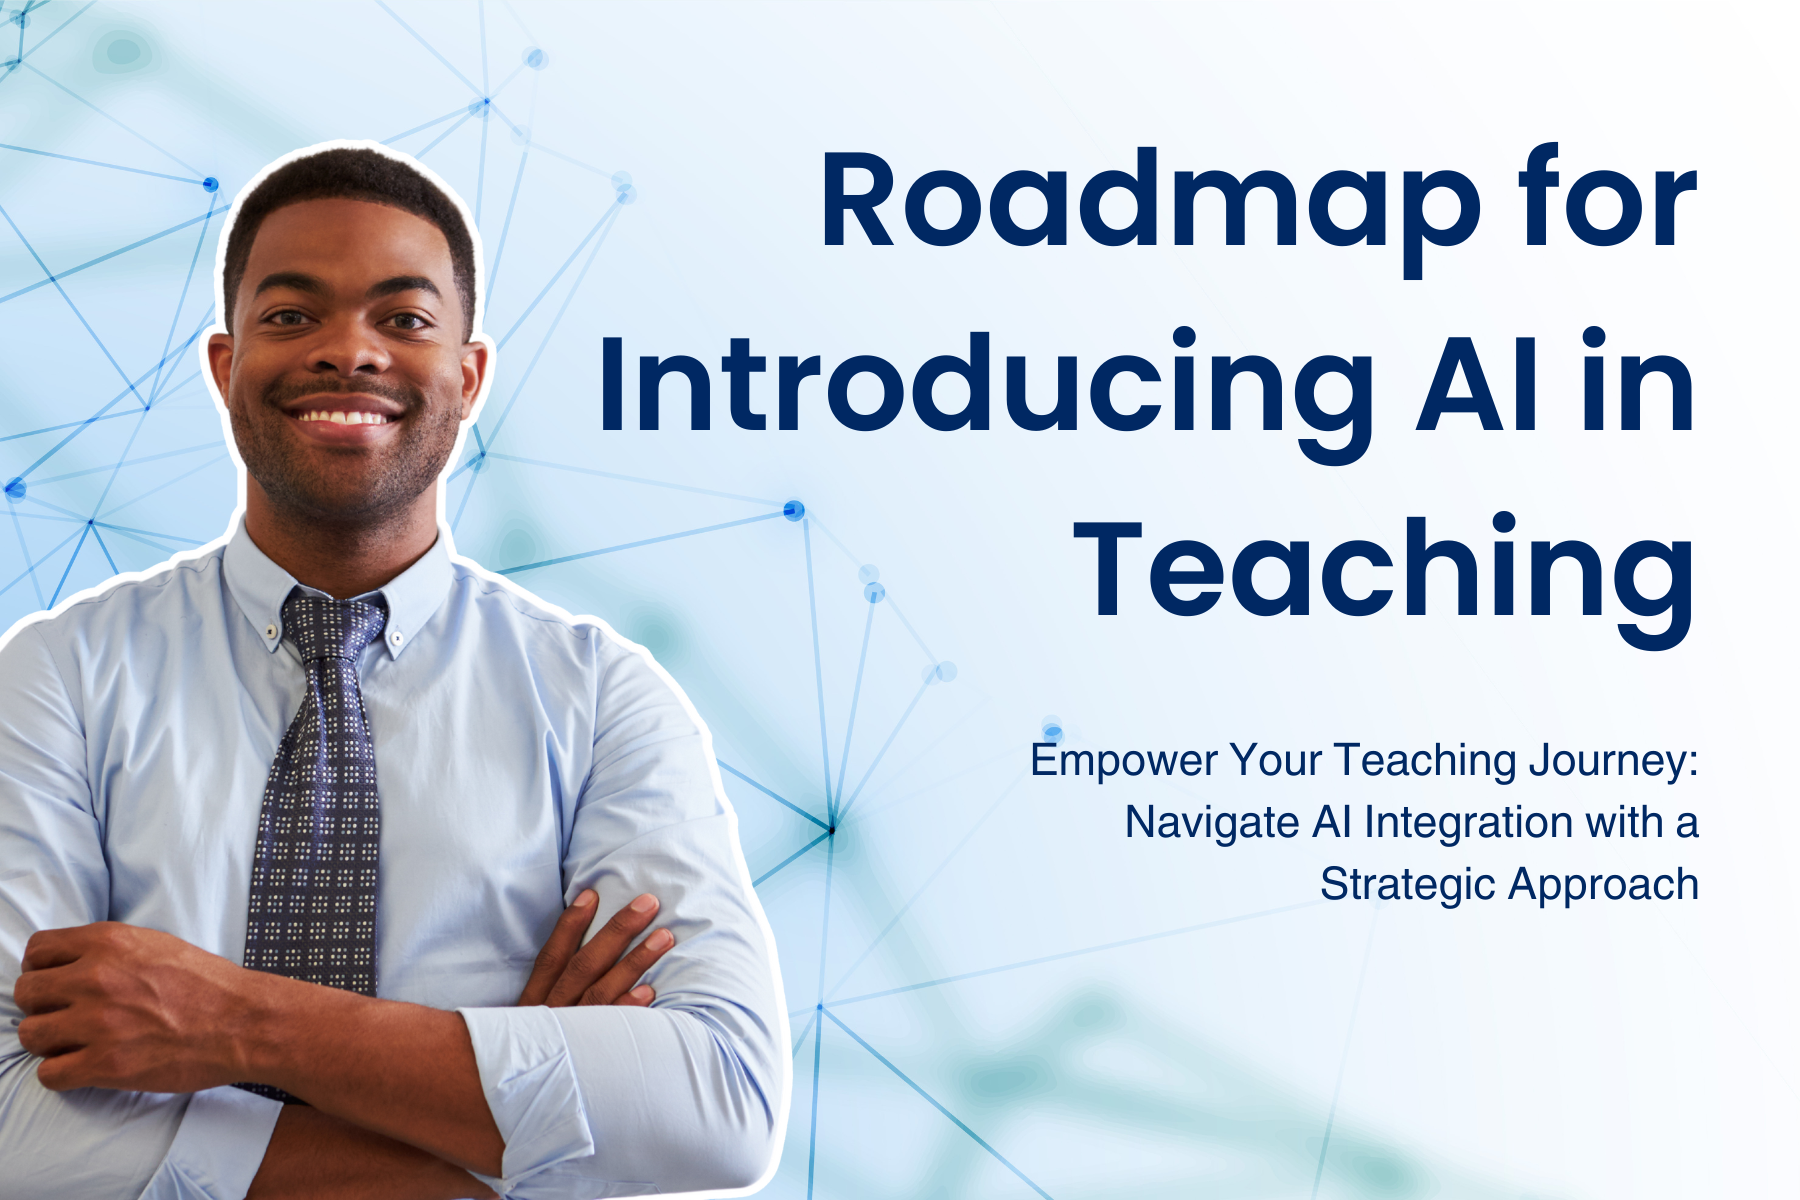 Roadmap for Introducing AI in Teaching